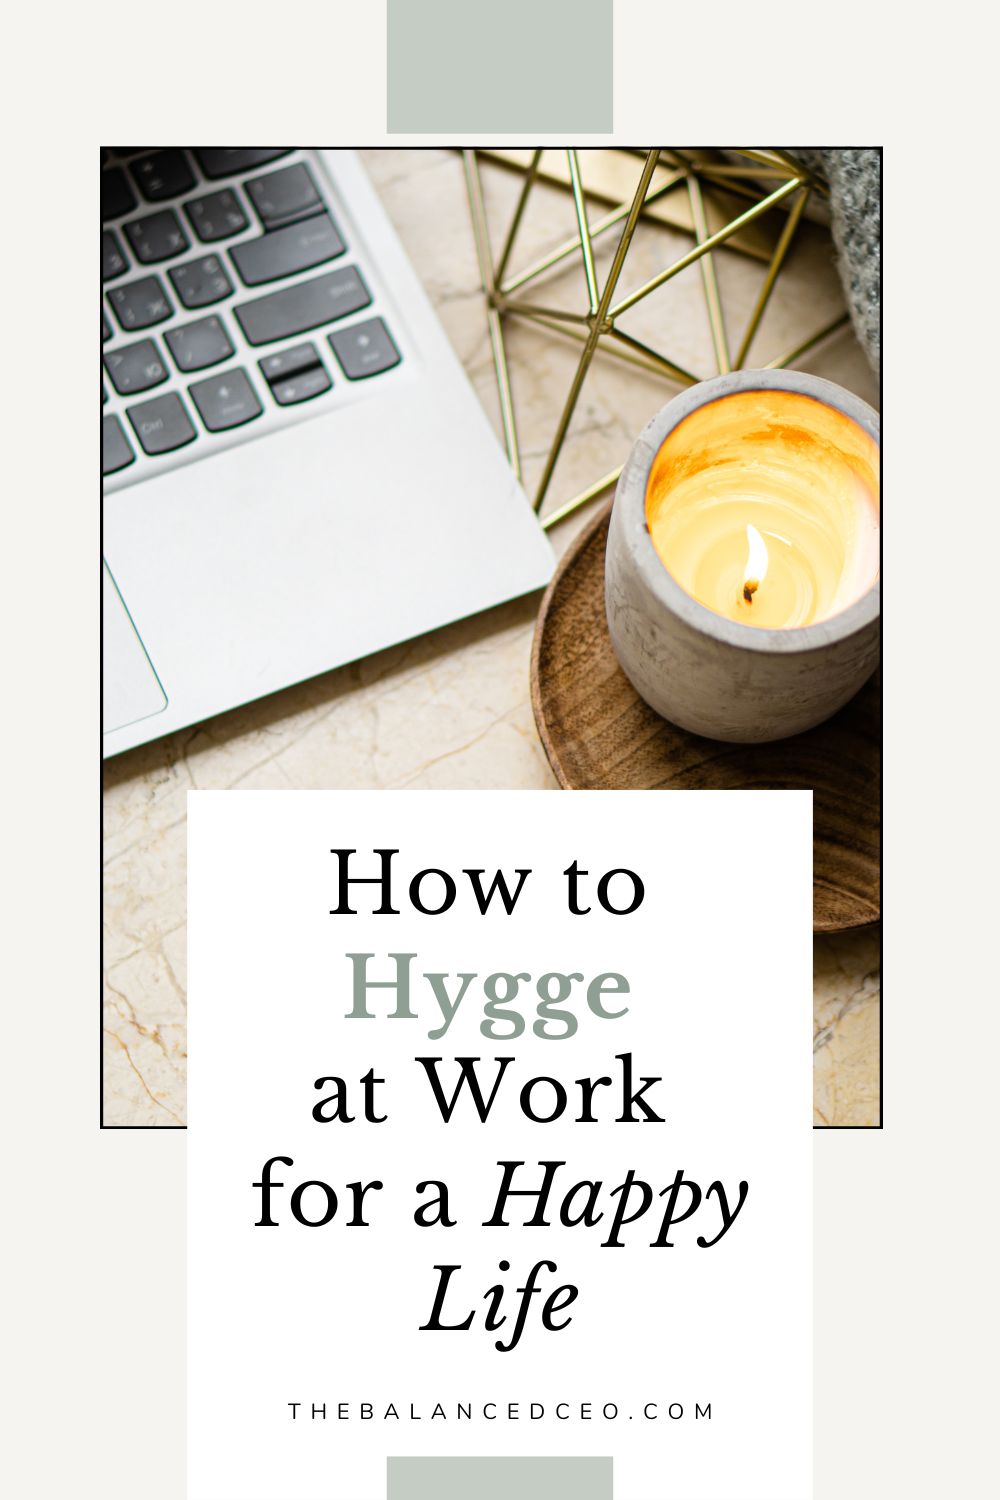 How to Hygge at Work for a Happy Life